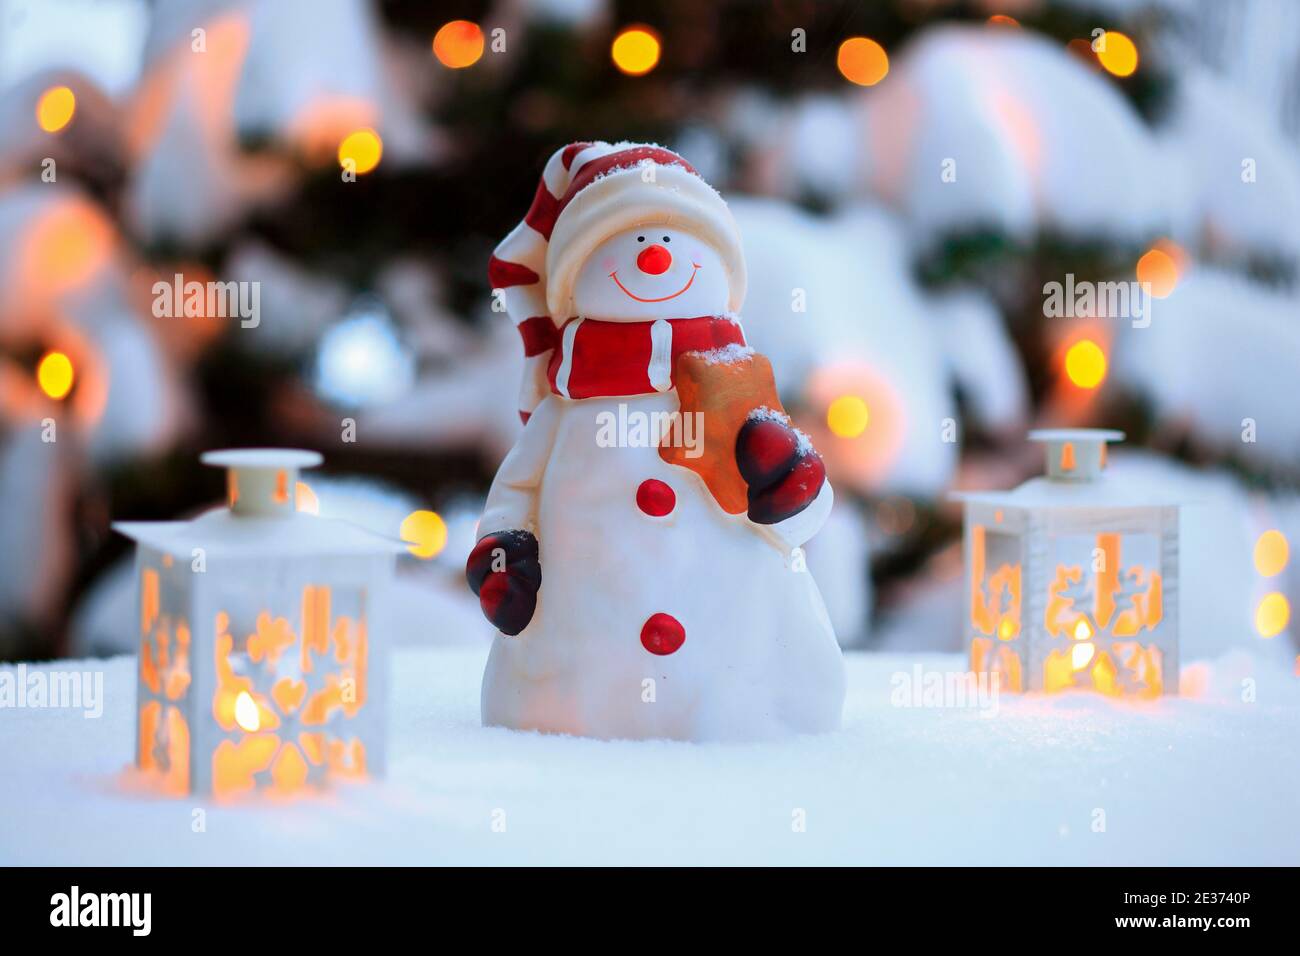 Atmospheric outdoor Christmas decoration with snowman, lanterns, snow and fairy lights on Christmas tree Stock Photo